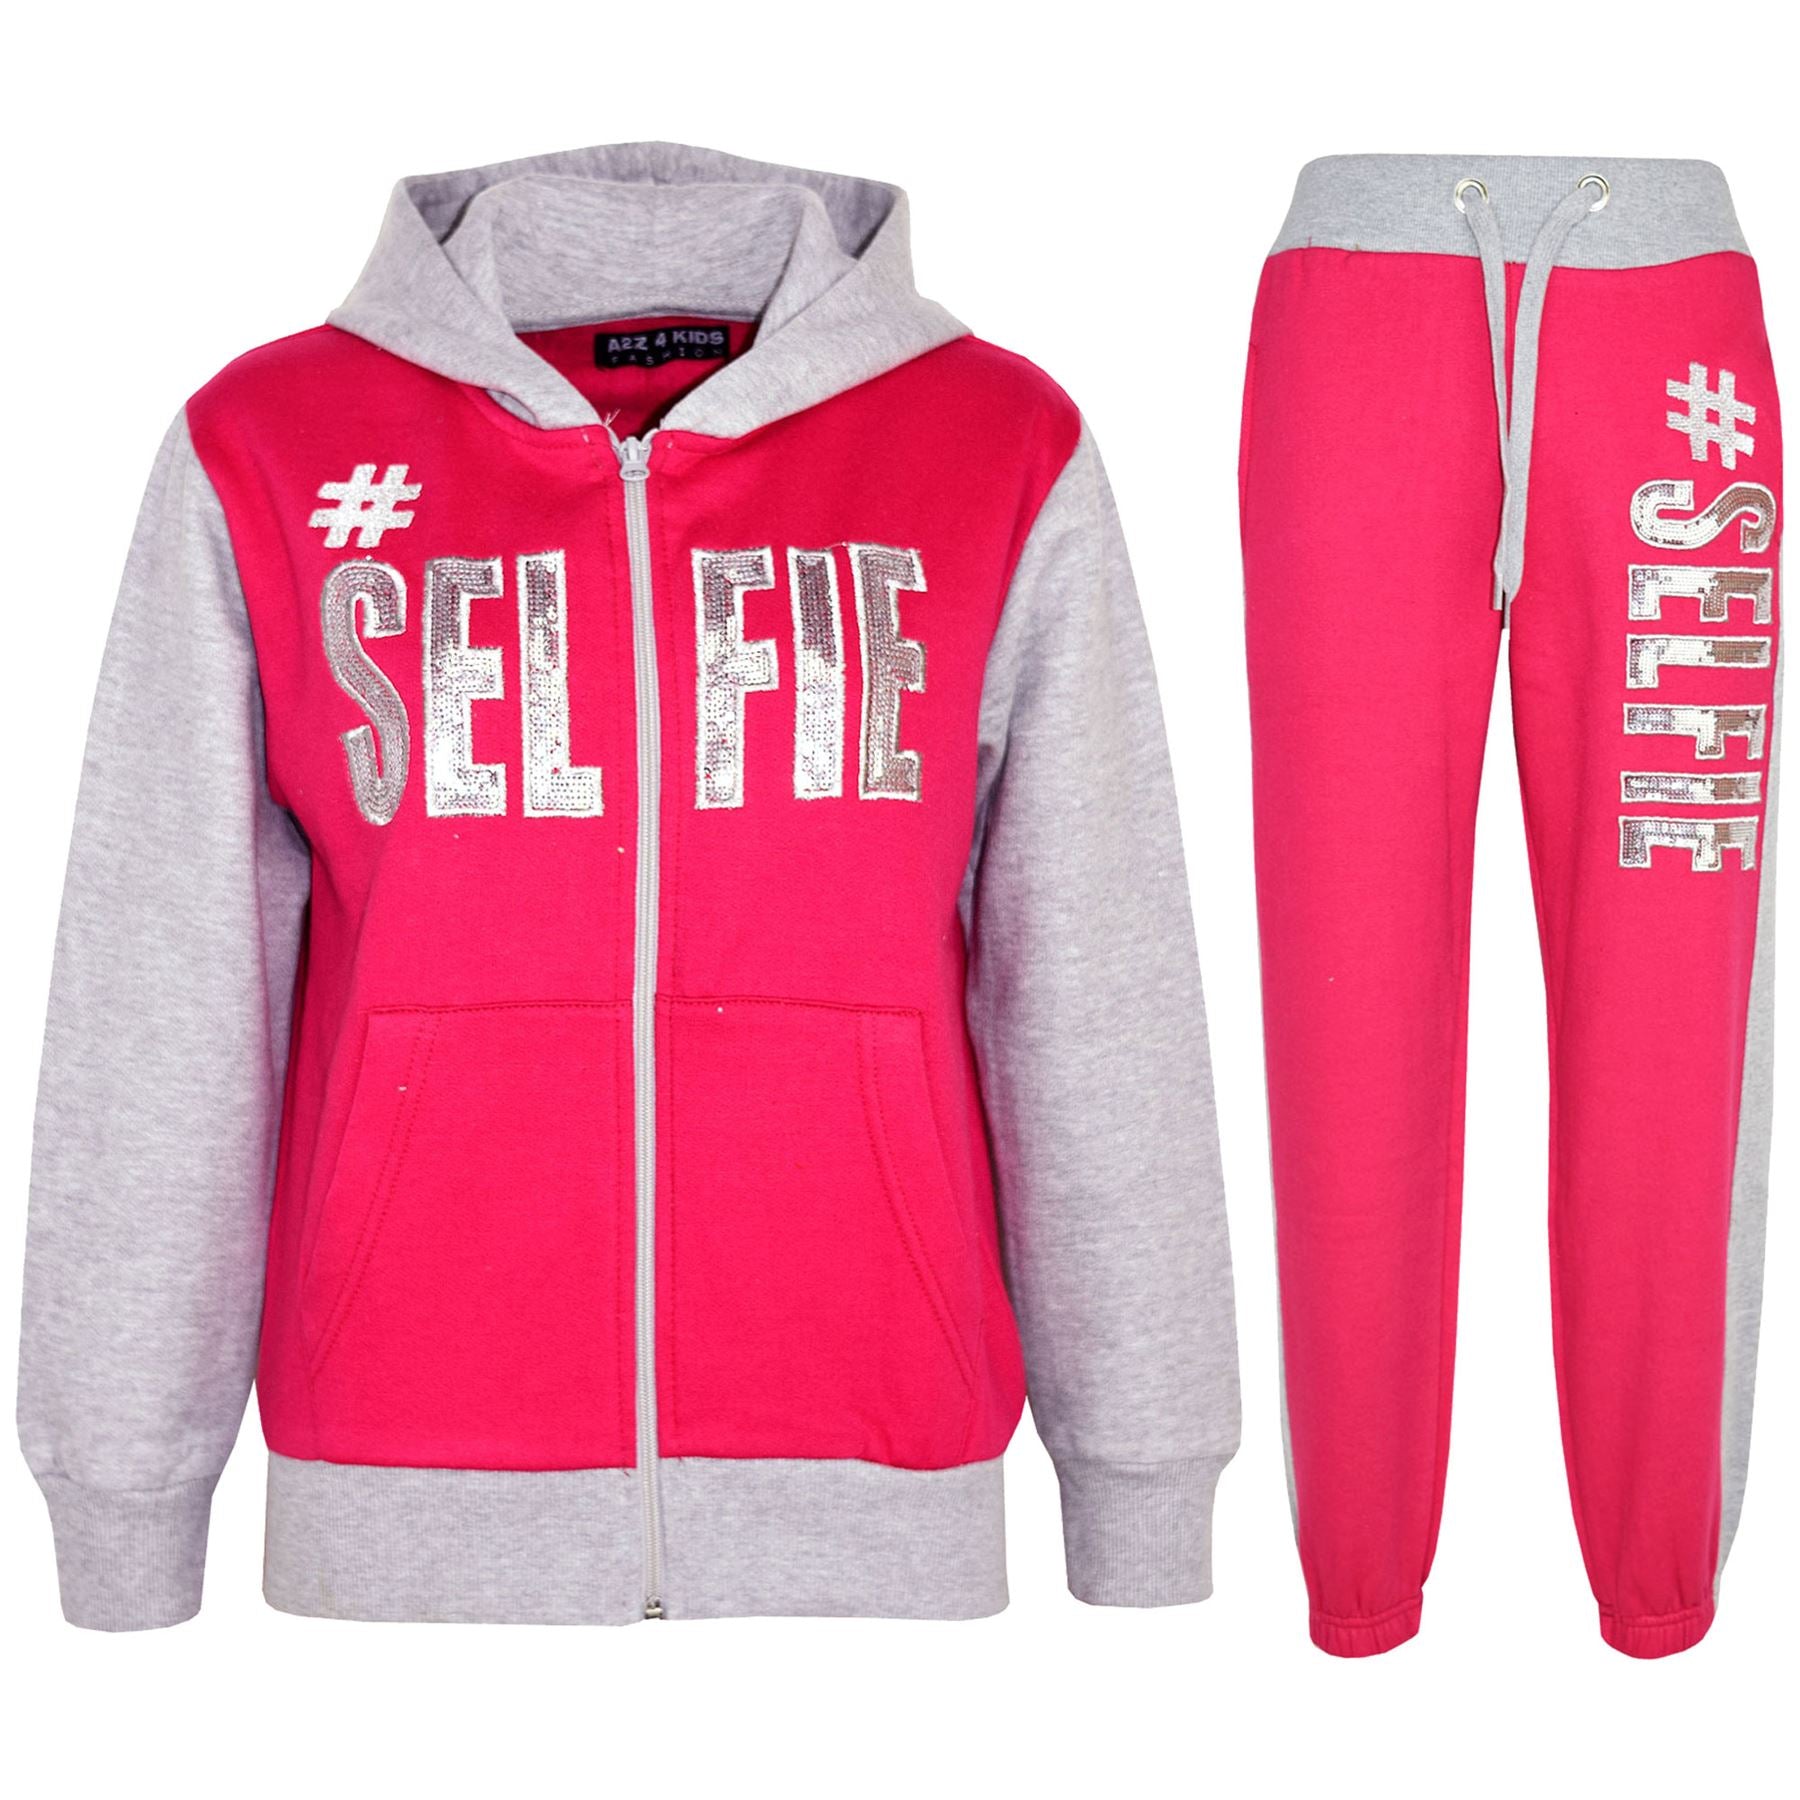 Girls #SELFIE Sequin Embroidered Pink & Grey Tracksuit